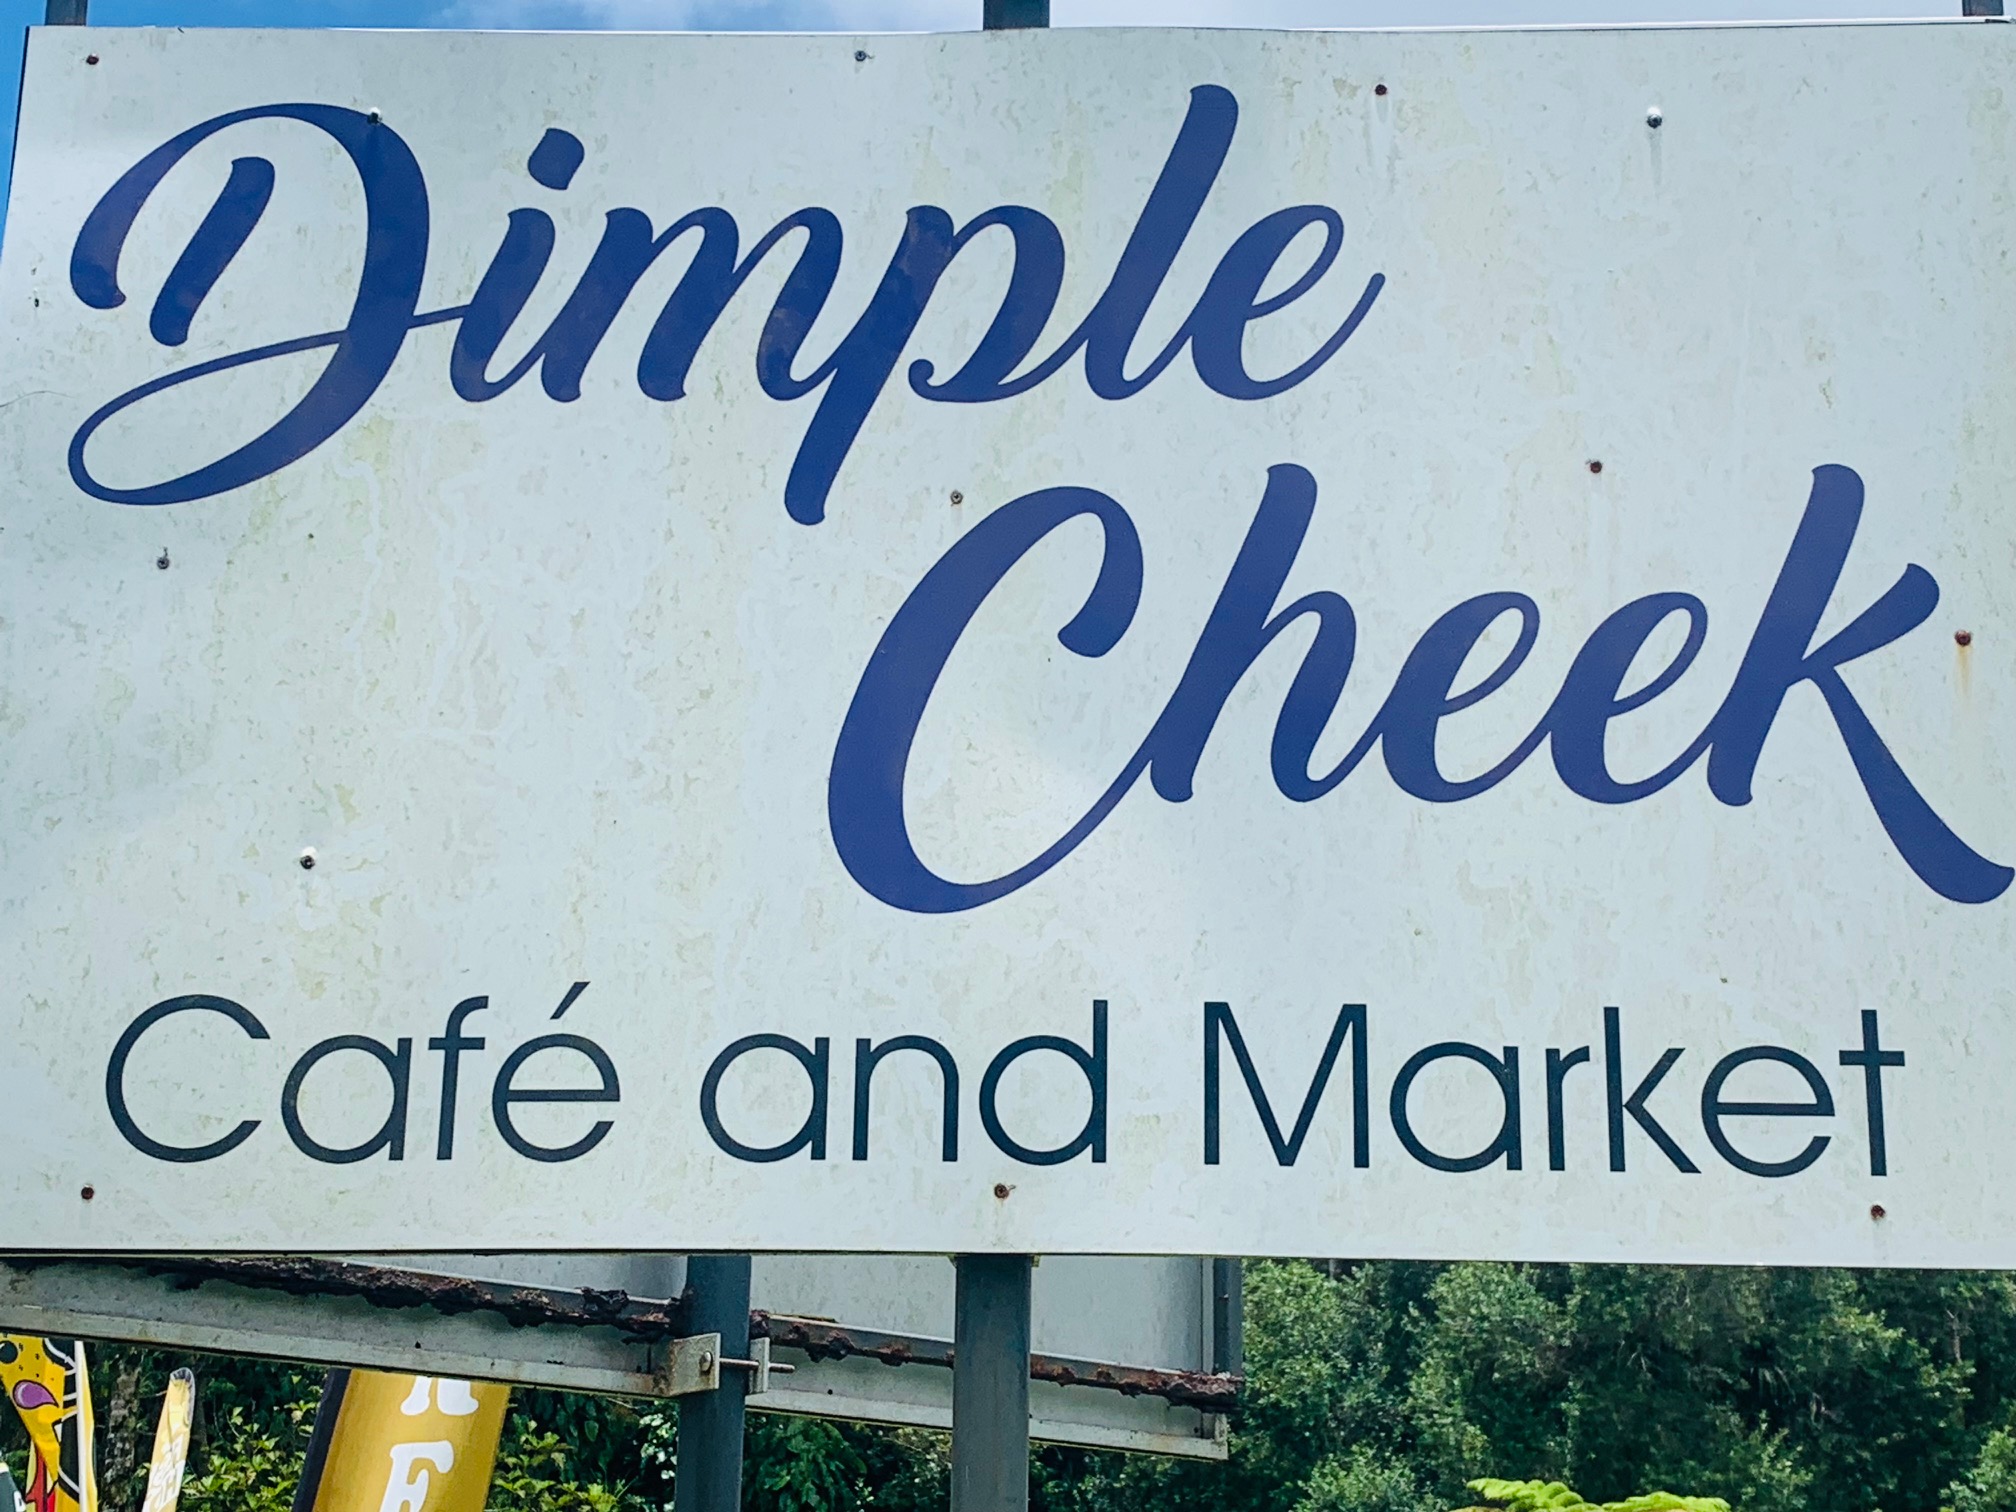 Dimple Cheek Cafe and Local Market